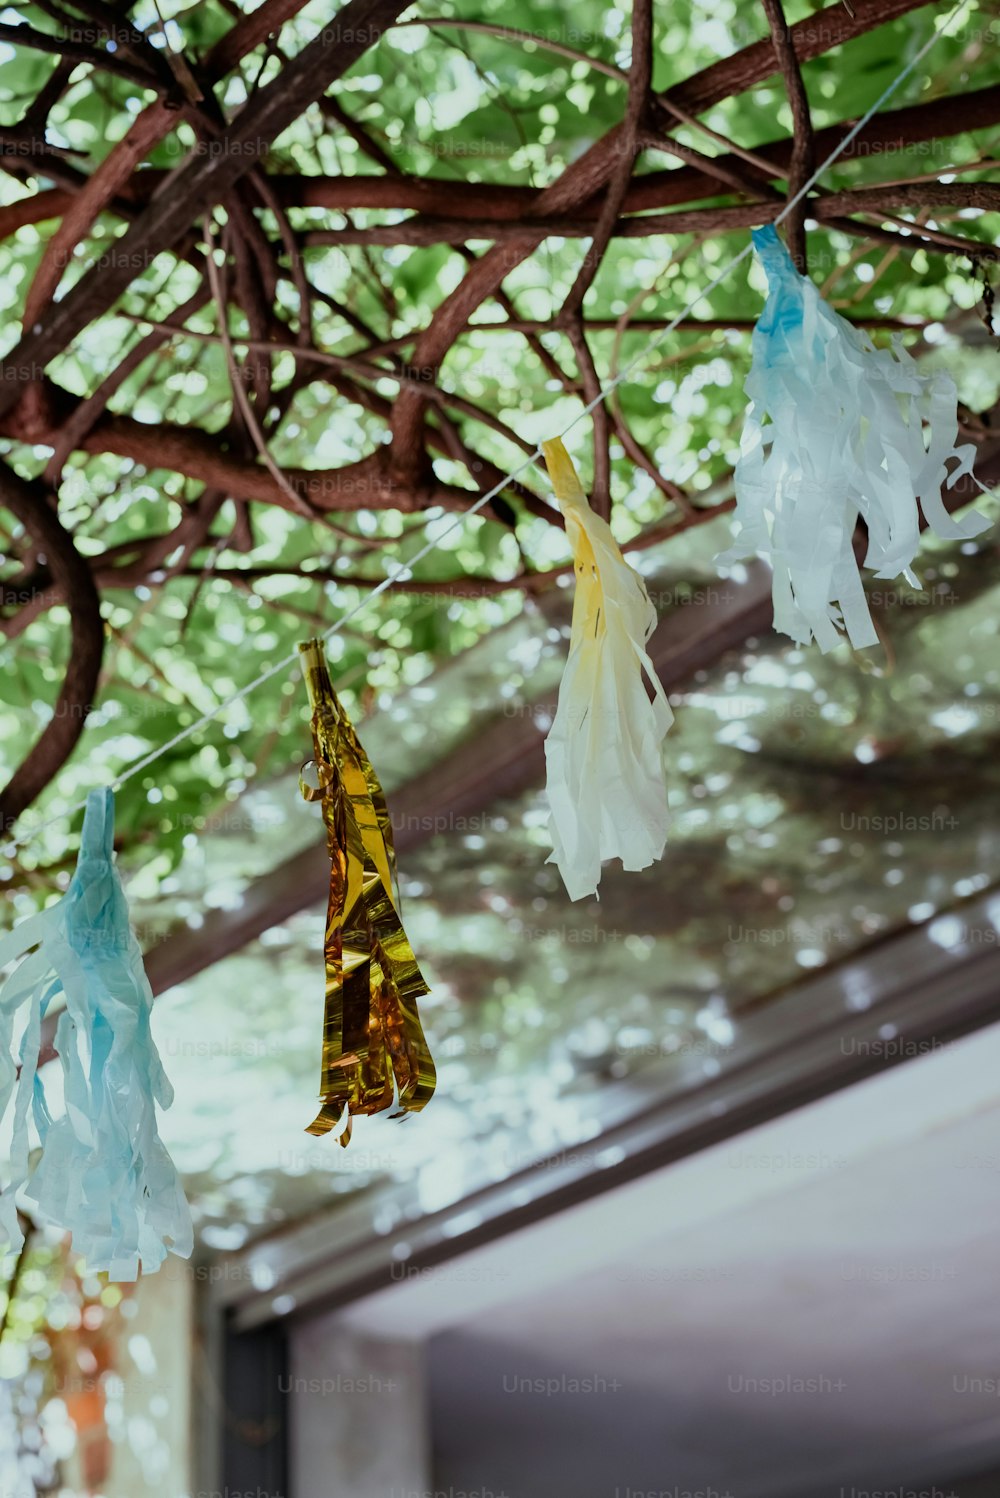 a group of plastic bags hanging from a tree